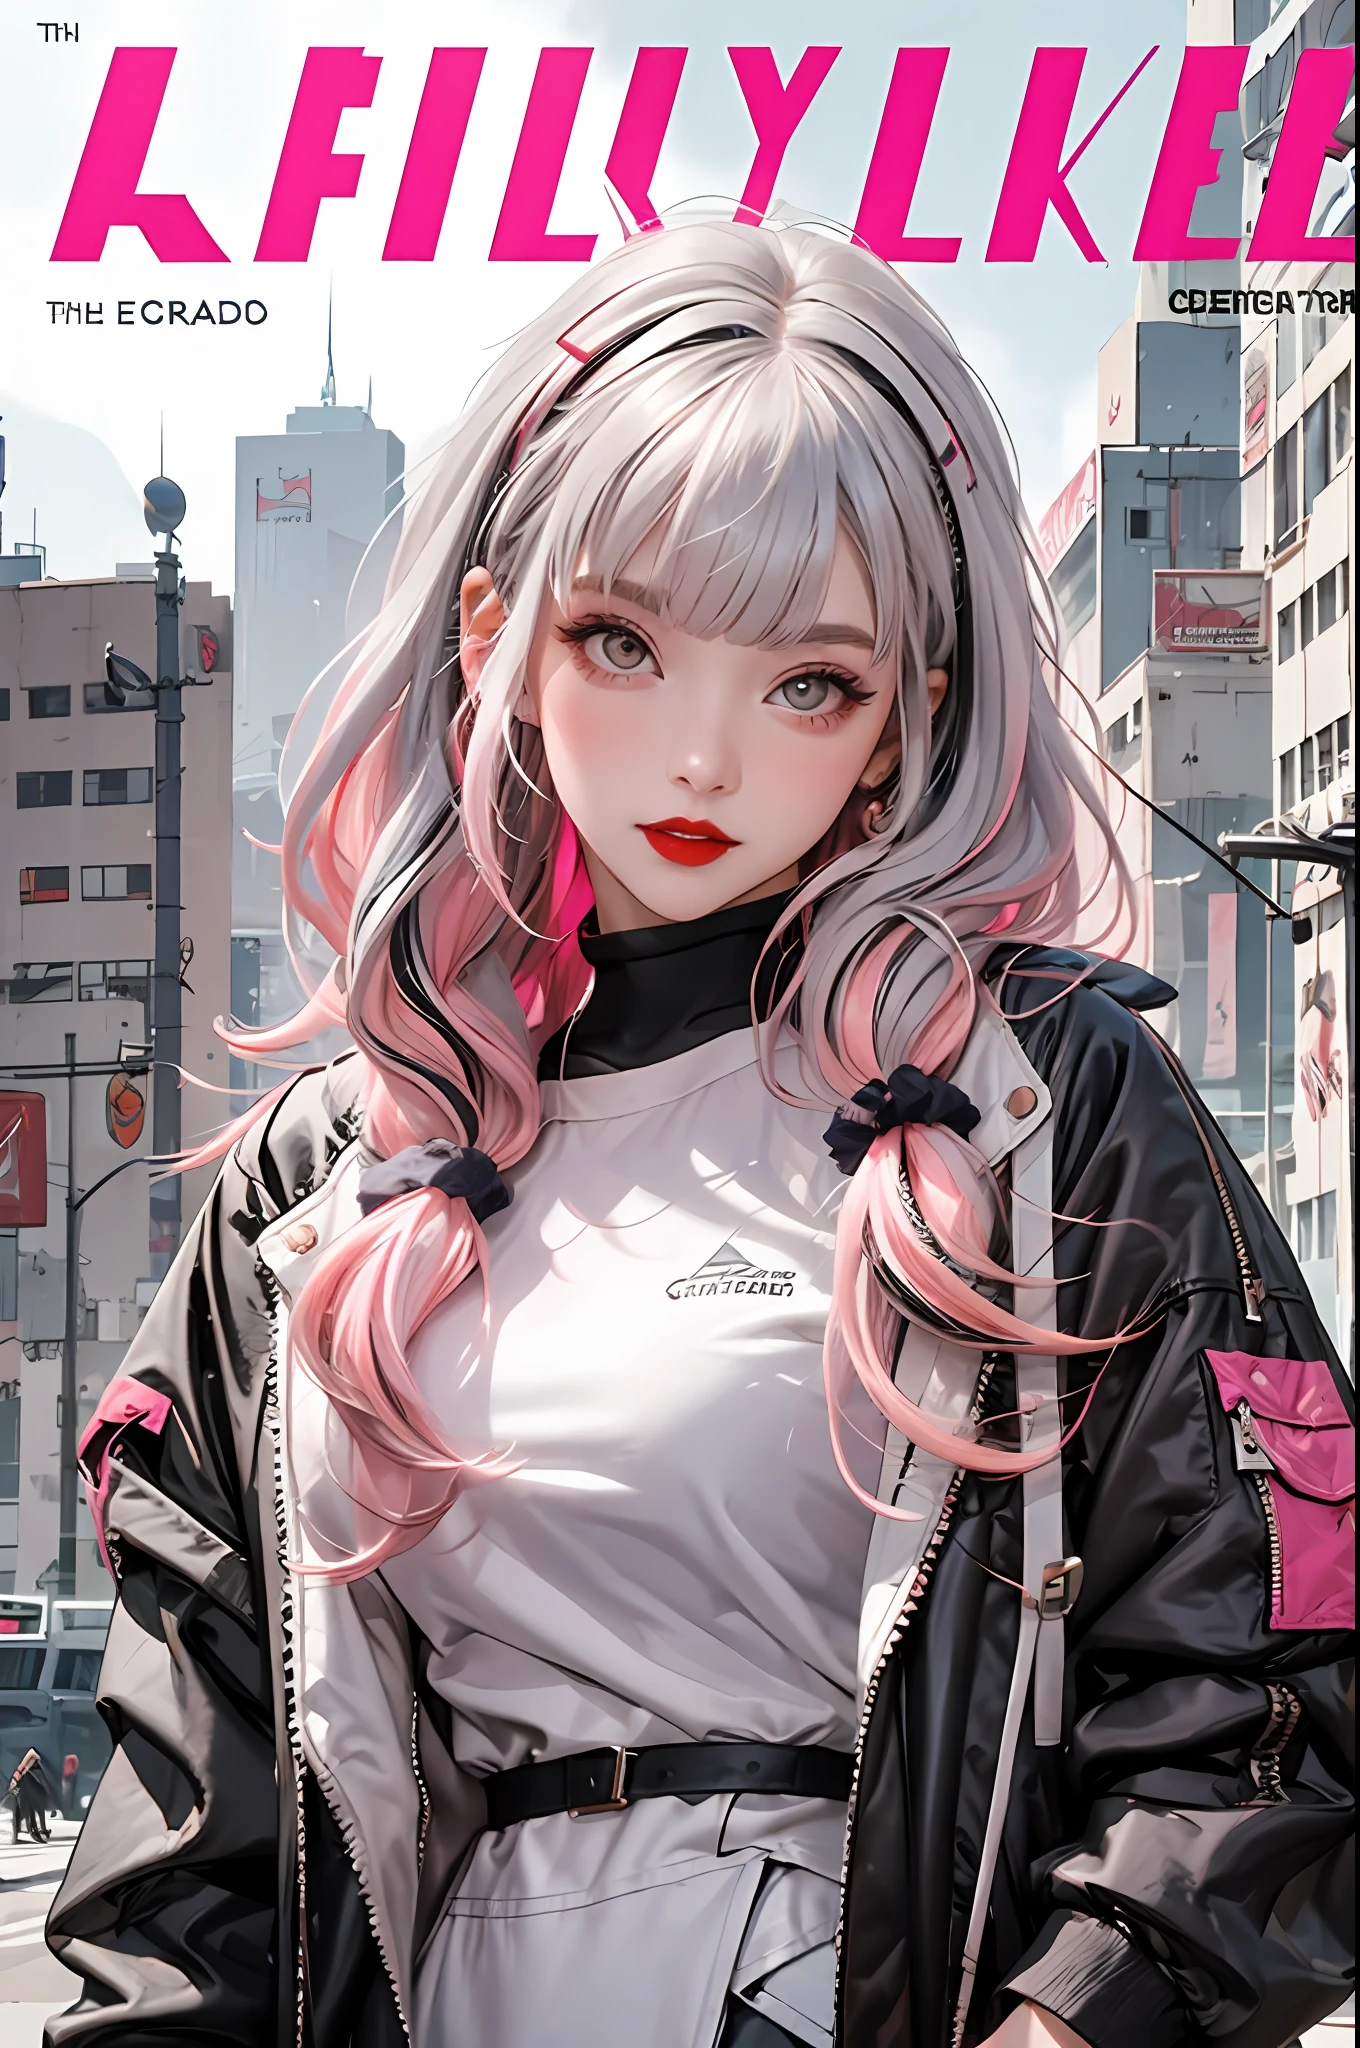 lucy \(Cyberpunk\), 1girls, hair scrunchie, Silver hair, , grey eyes, Jacket, Long sleeves, O cabelo multicolorido, Bangs separated, lips parted, pink hair, Red eyeliner, red-lips, White jacket, The cyberpunk\(series\), cover of a magazine，